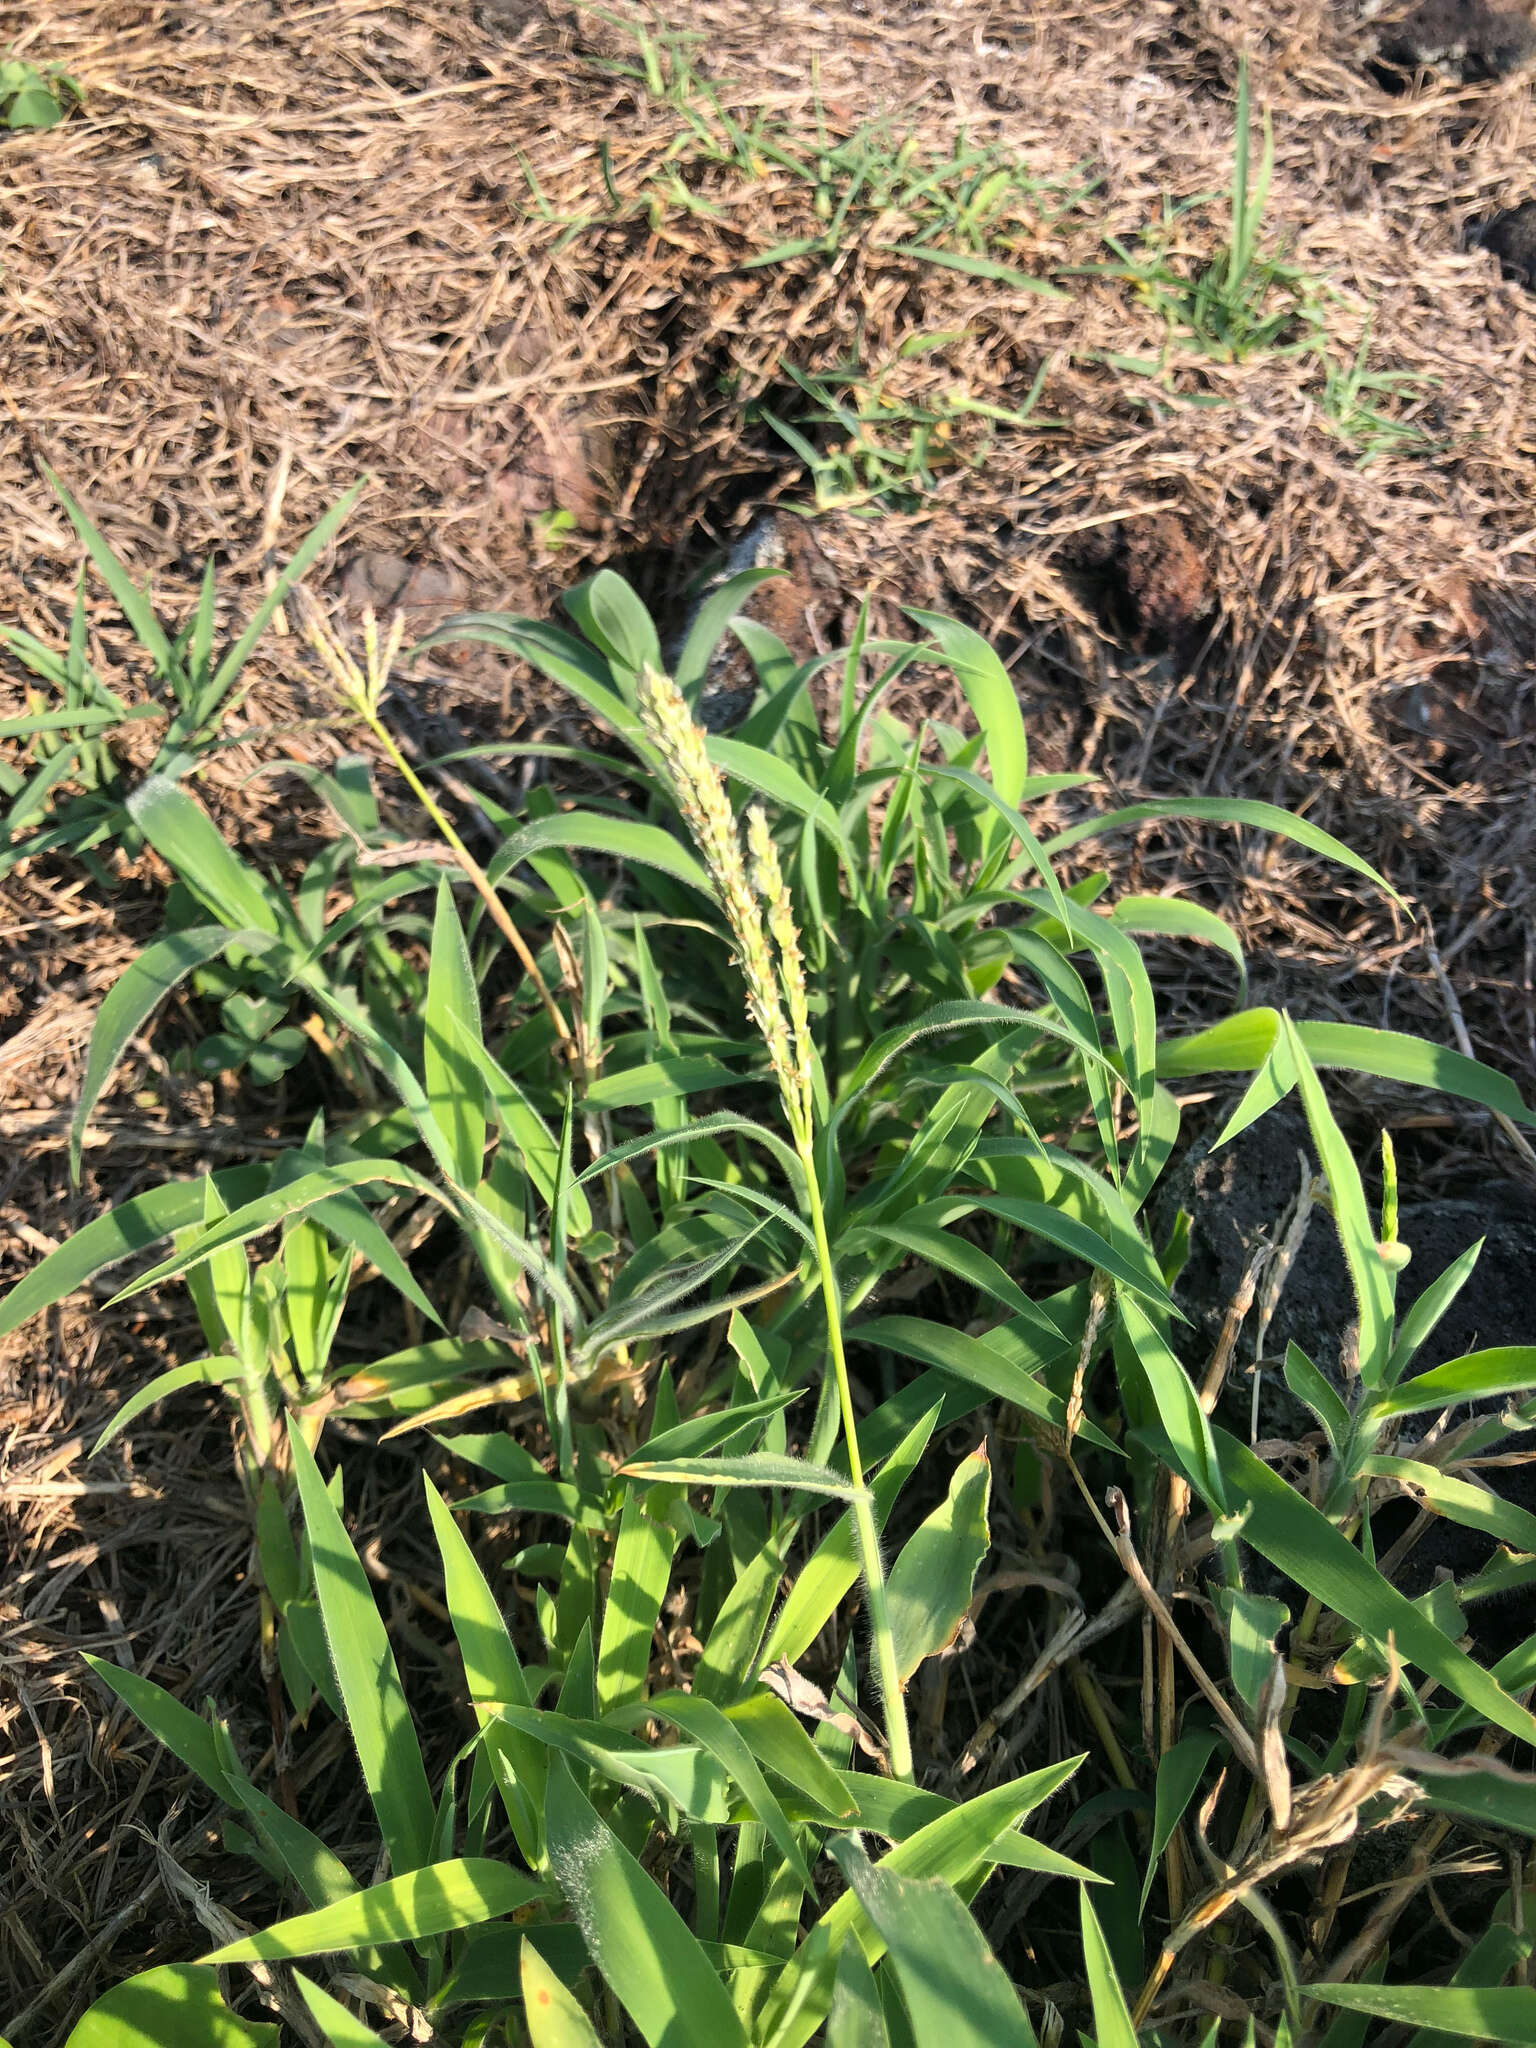 Image of southern crabgrass